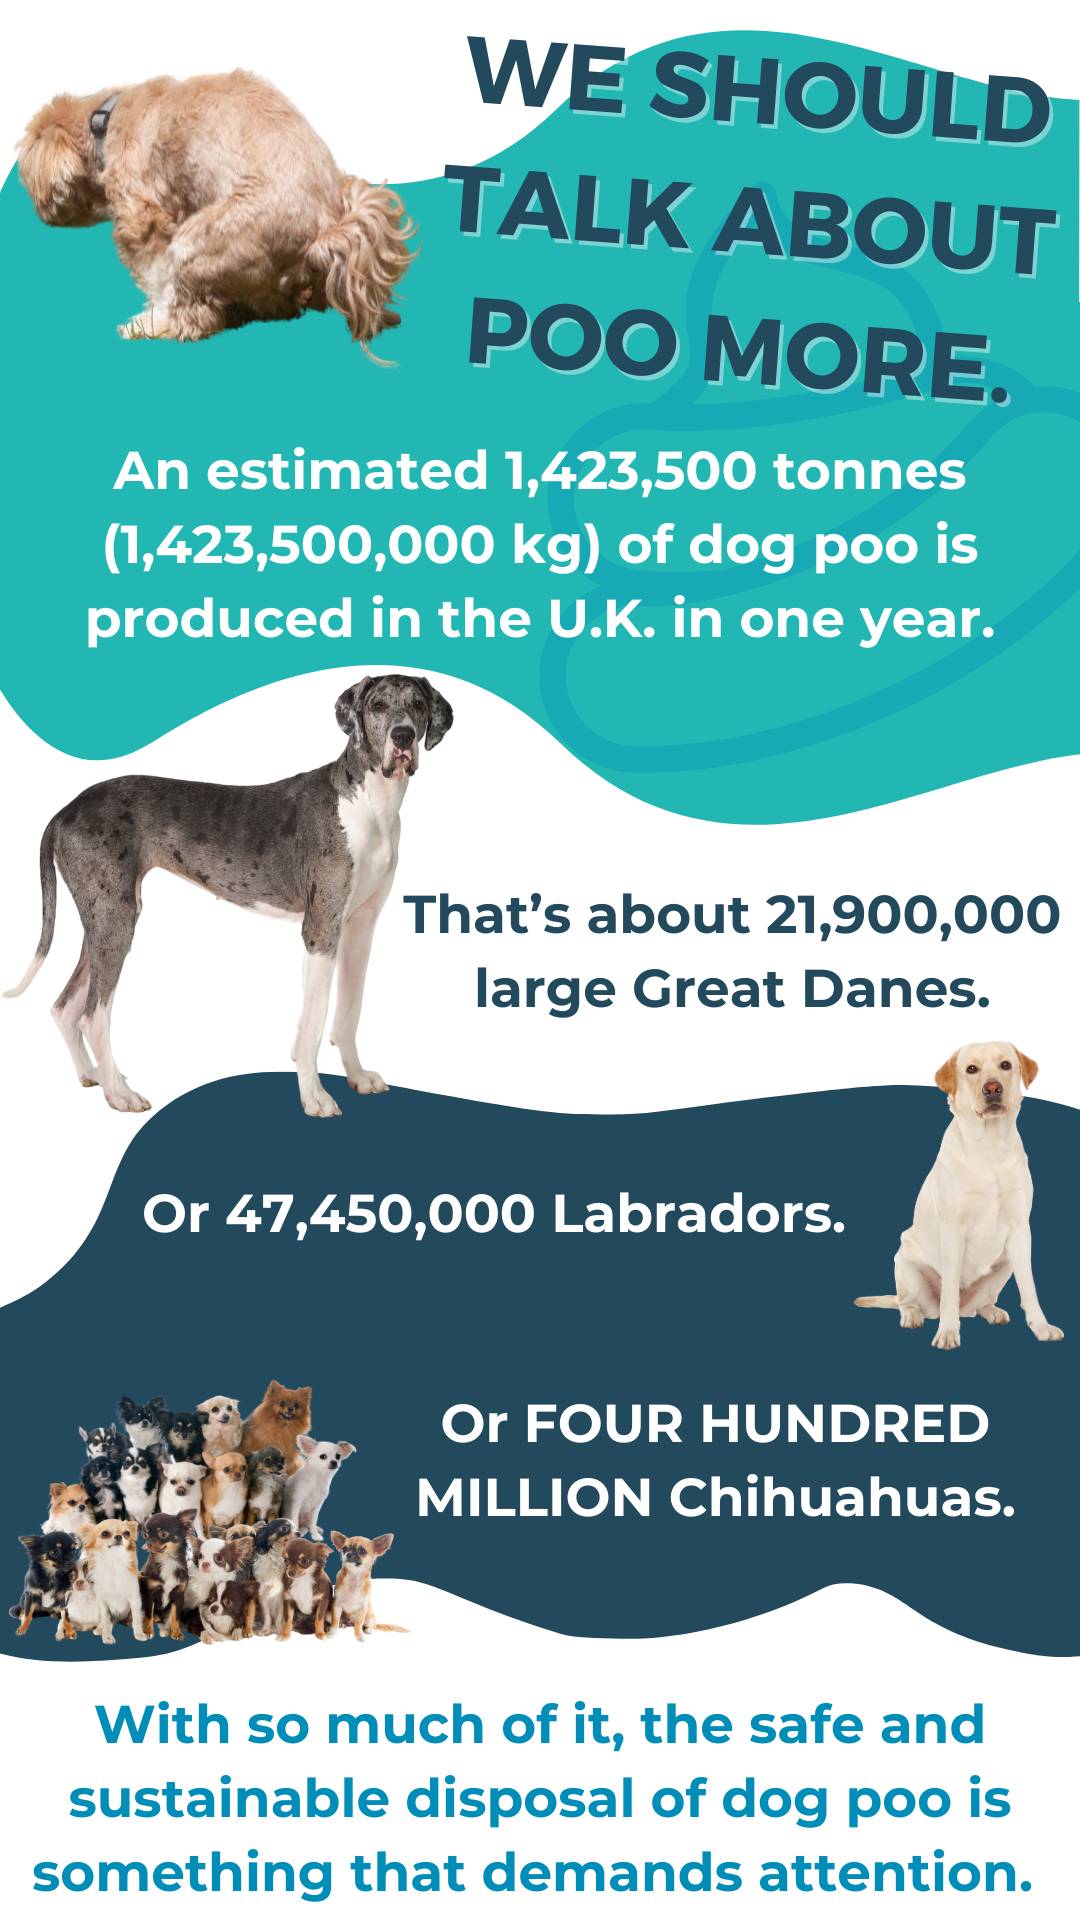 We should talk about poo more. An estimated 1423500 tonnes of dog poo is produced in the UK in one year! With so much of it, the safe and sustainable disposal of dog poo is something that demands attention.